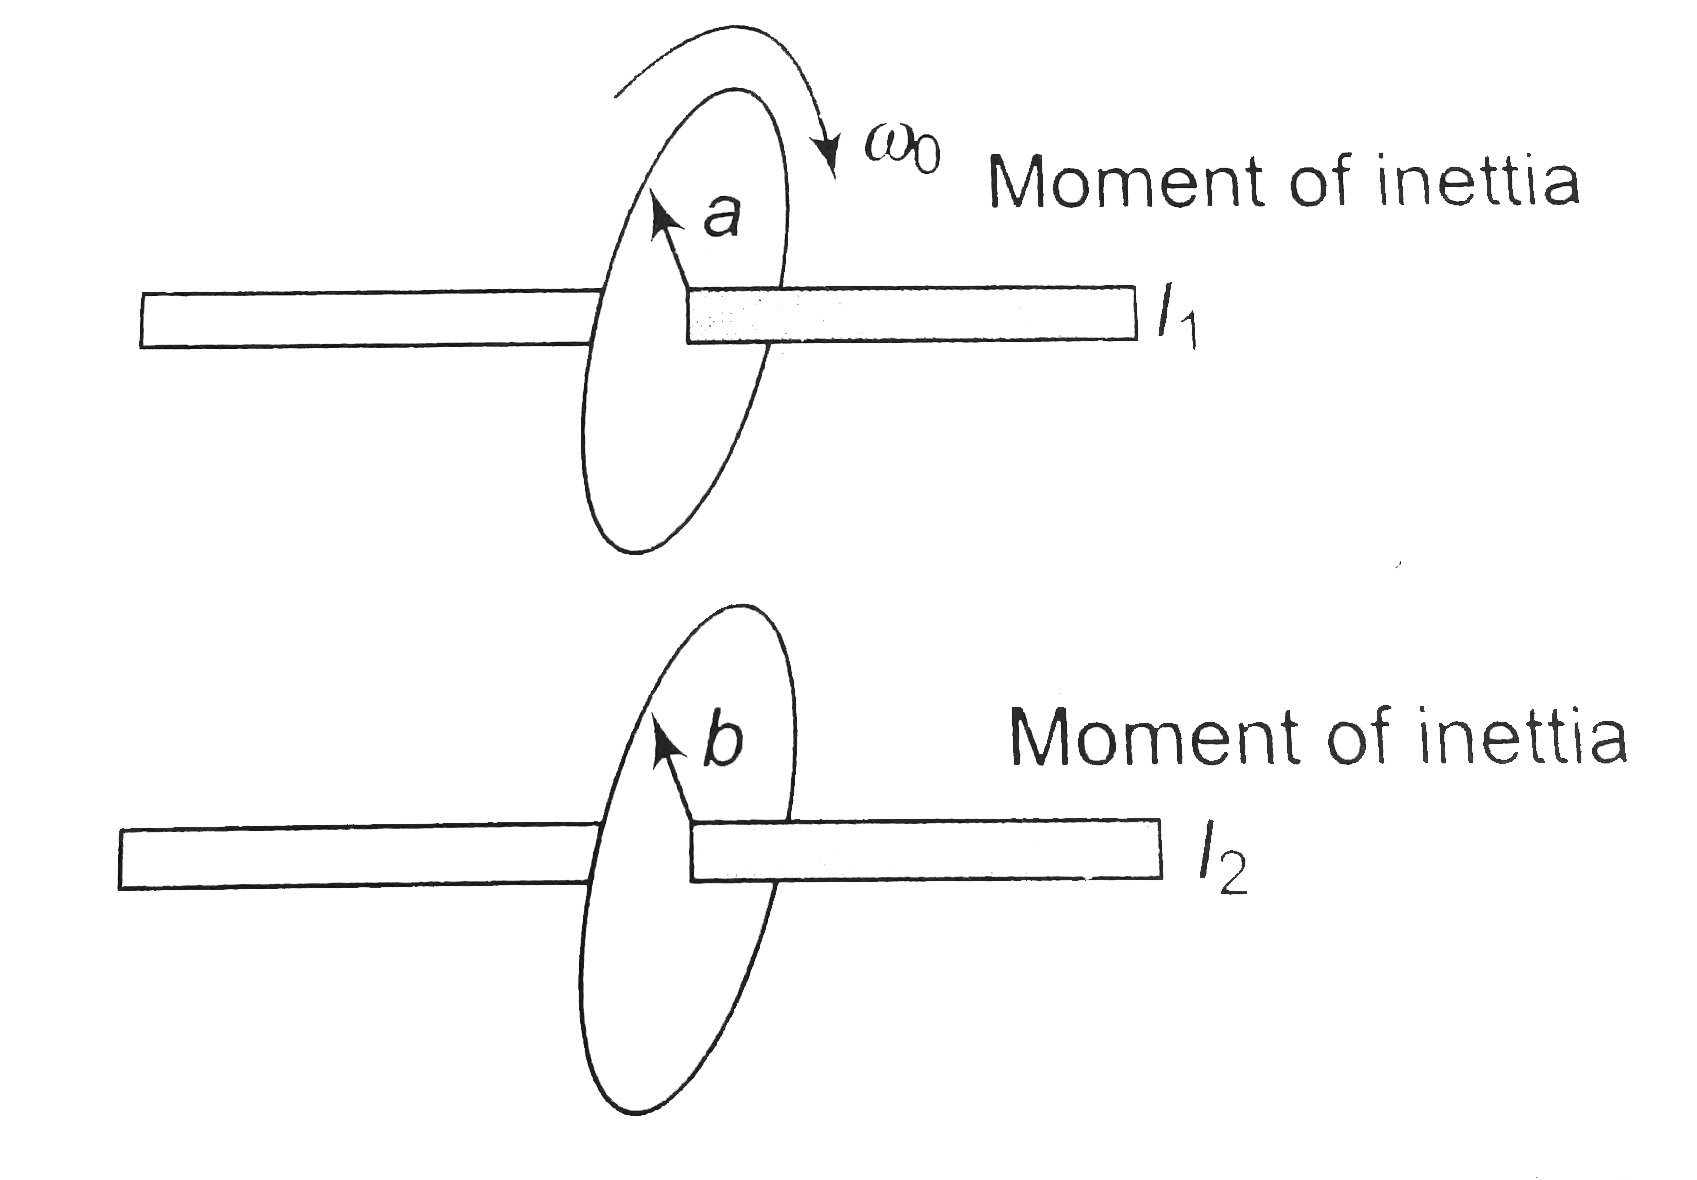 The two uniform discs rotate separately on parallel axles. The upper disc (radius a and momentum of inertia I1) is given an angular velocity omega0 and the lower disc of (radius b and momentum of inertia I2) is at rest. Now the two discs are moved together so that their rims touch. Final angular velocity of the upper disc is.   .